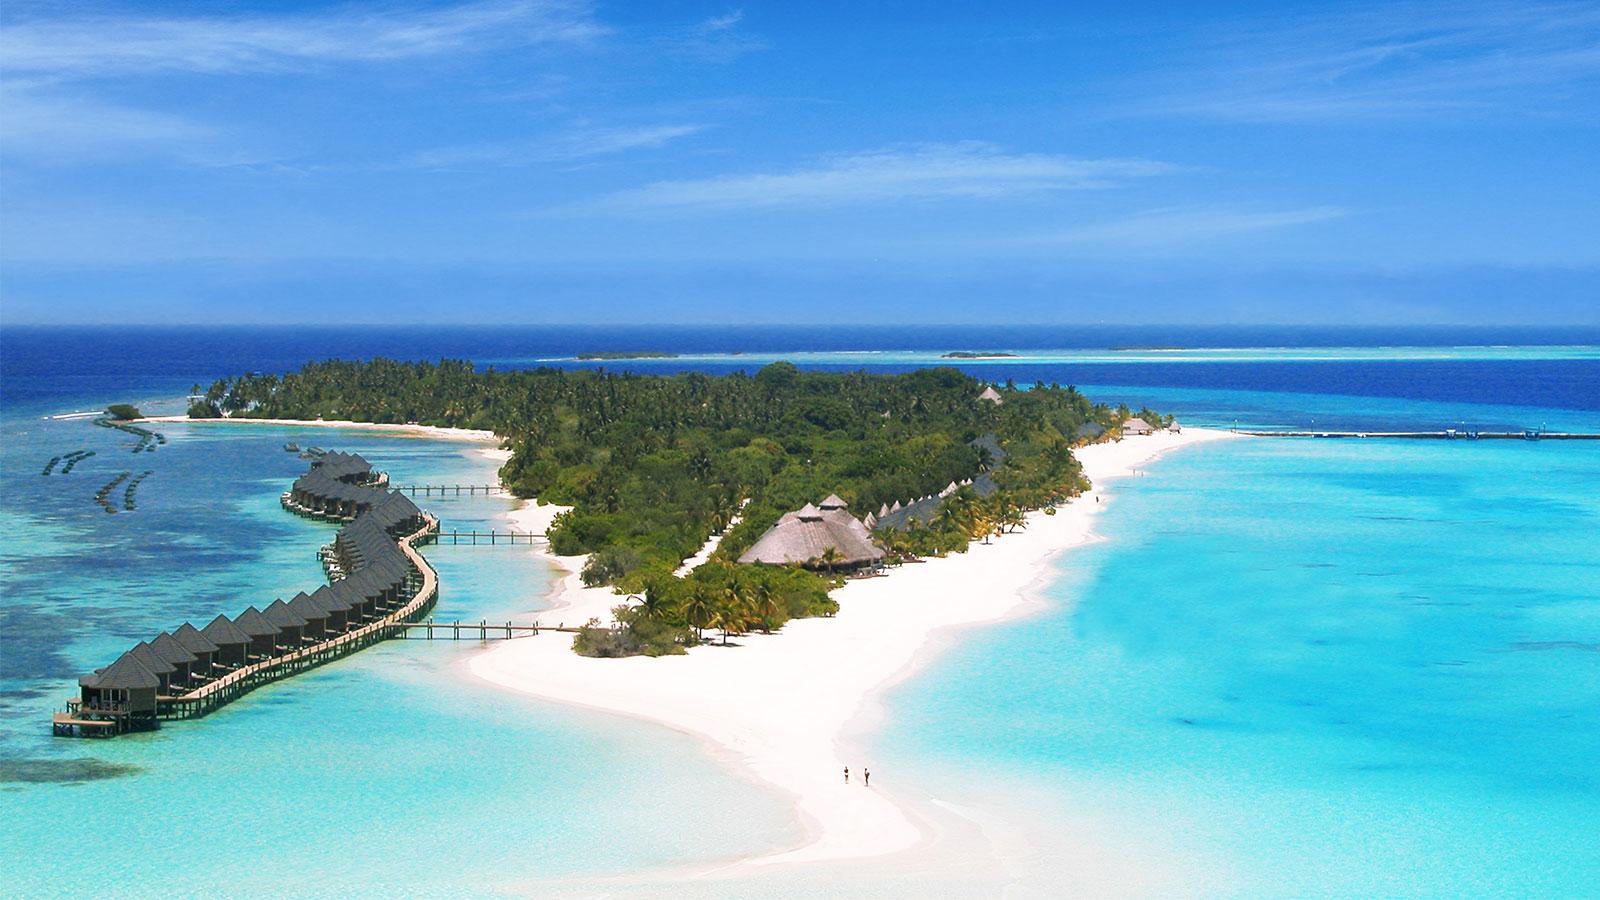 Maldives Resorts is a top rated and popular resort